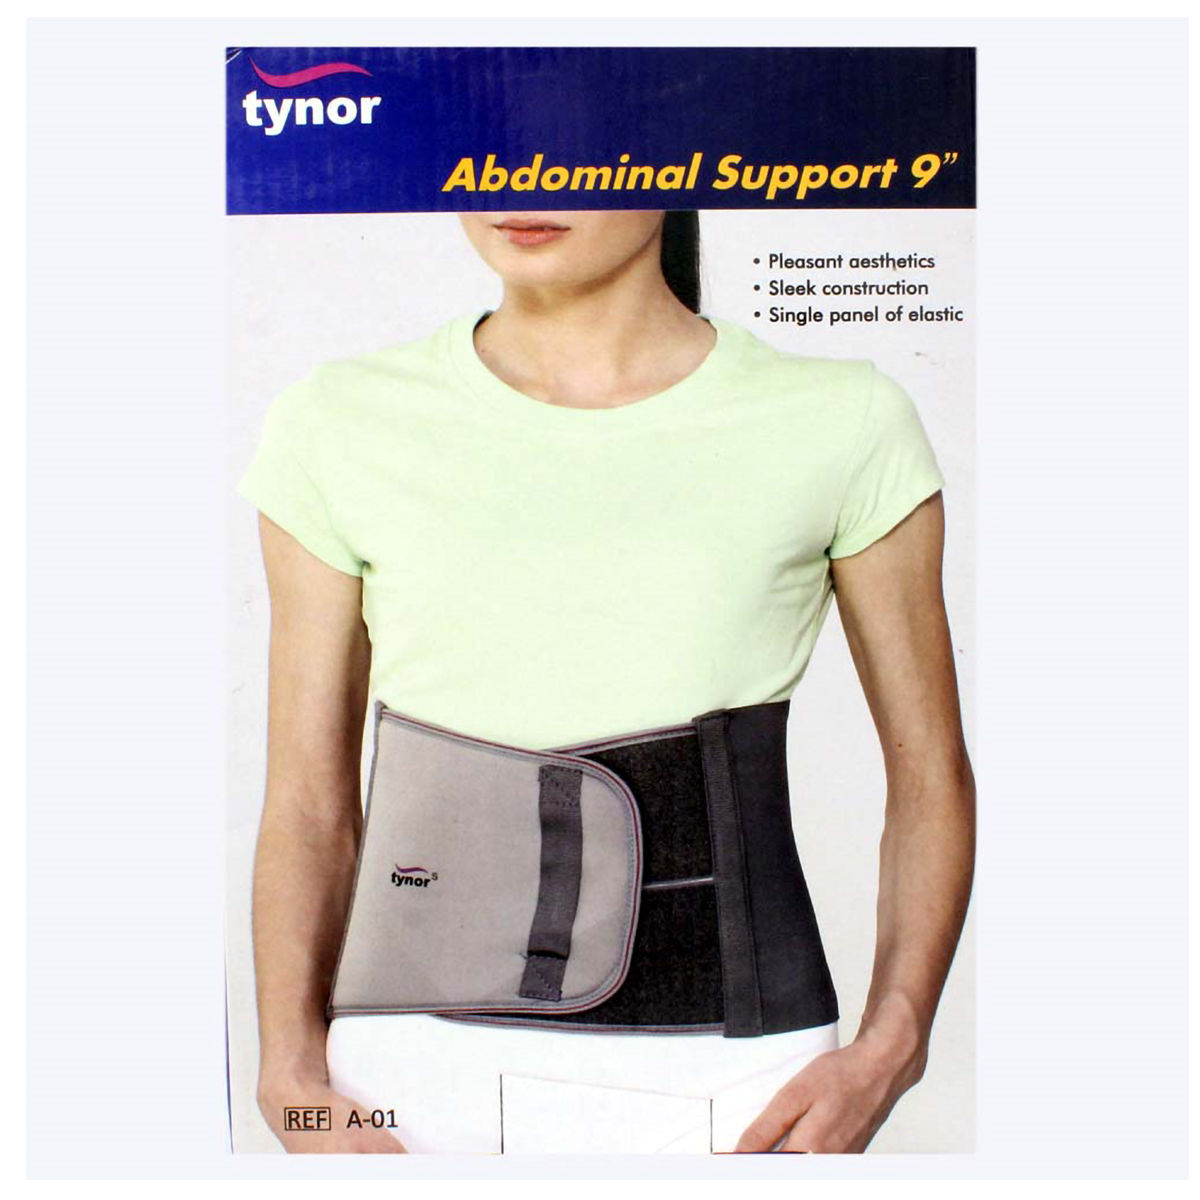 Tynor Abdominal Support 9 Belt Xl, 1 Count Price, Uses, Side